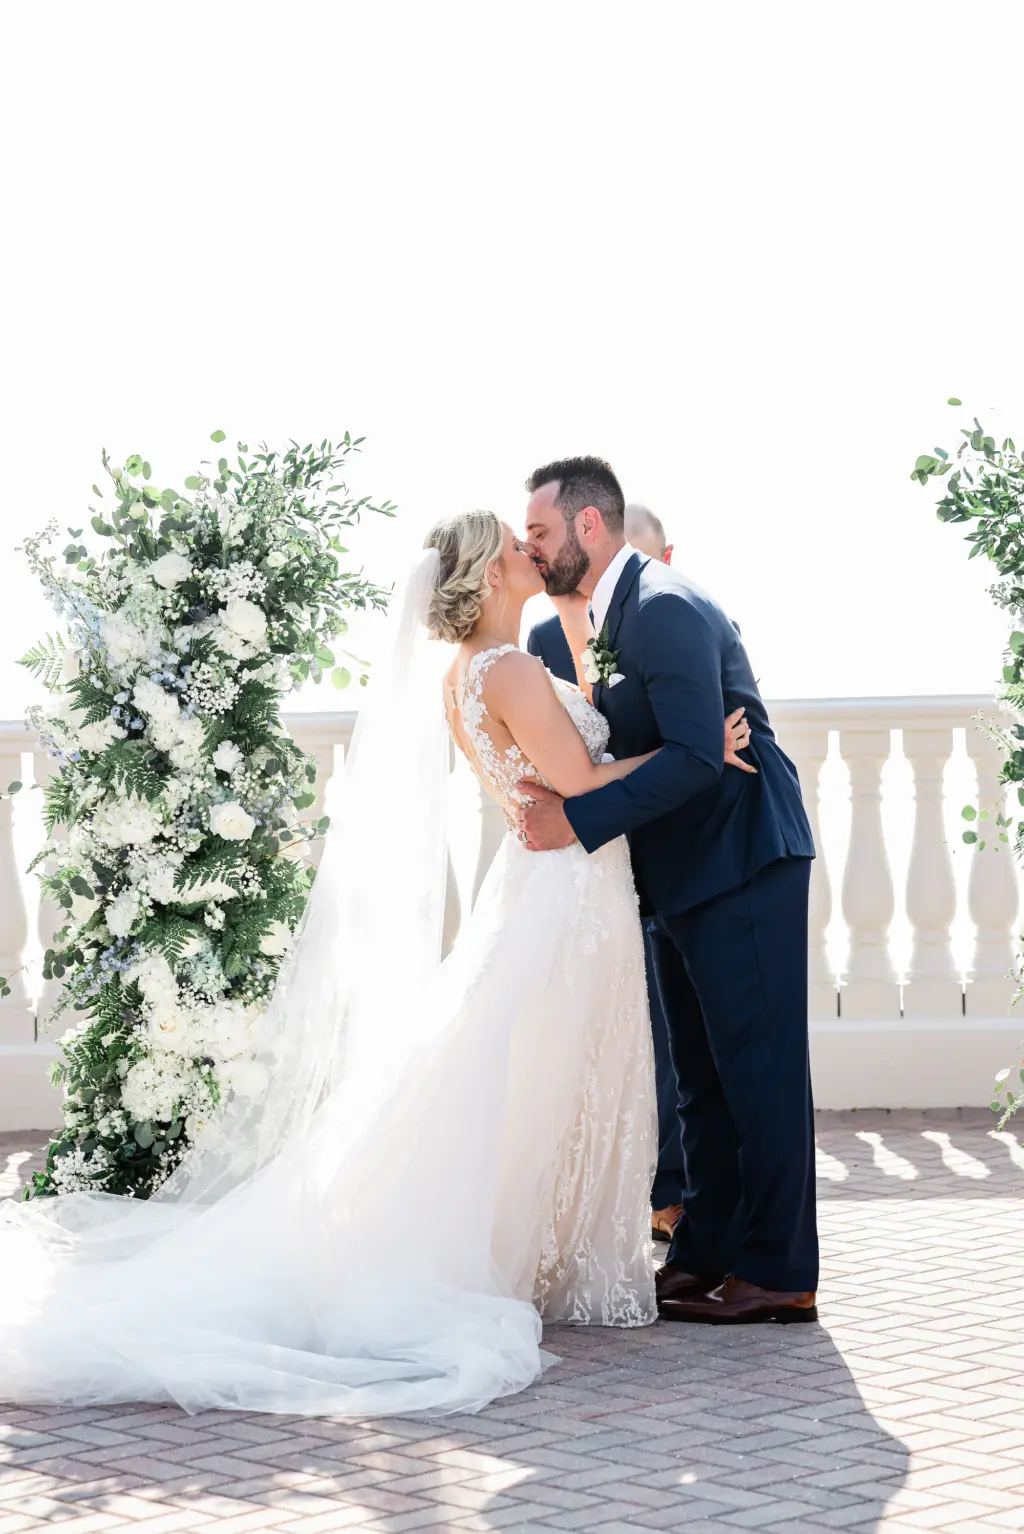 Bride and Groom Kiss Portrait | White Roses, Blue Delphinium, and Greenery Wedding Ceremony Arch Decor Inspiration | Tampa Bay Photographer Lifelong Photography Studio | Event Venue Hyatt Clearwater Beach | Planner Coastal Coordinating